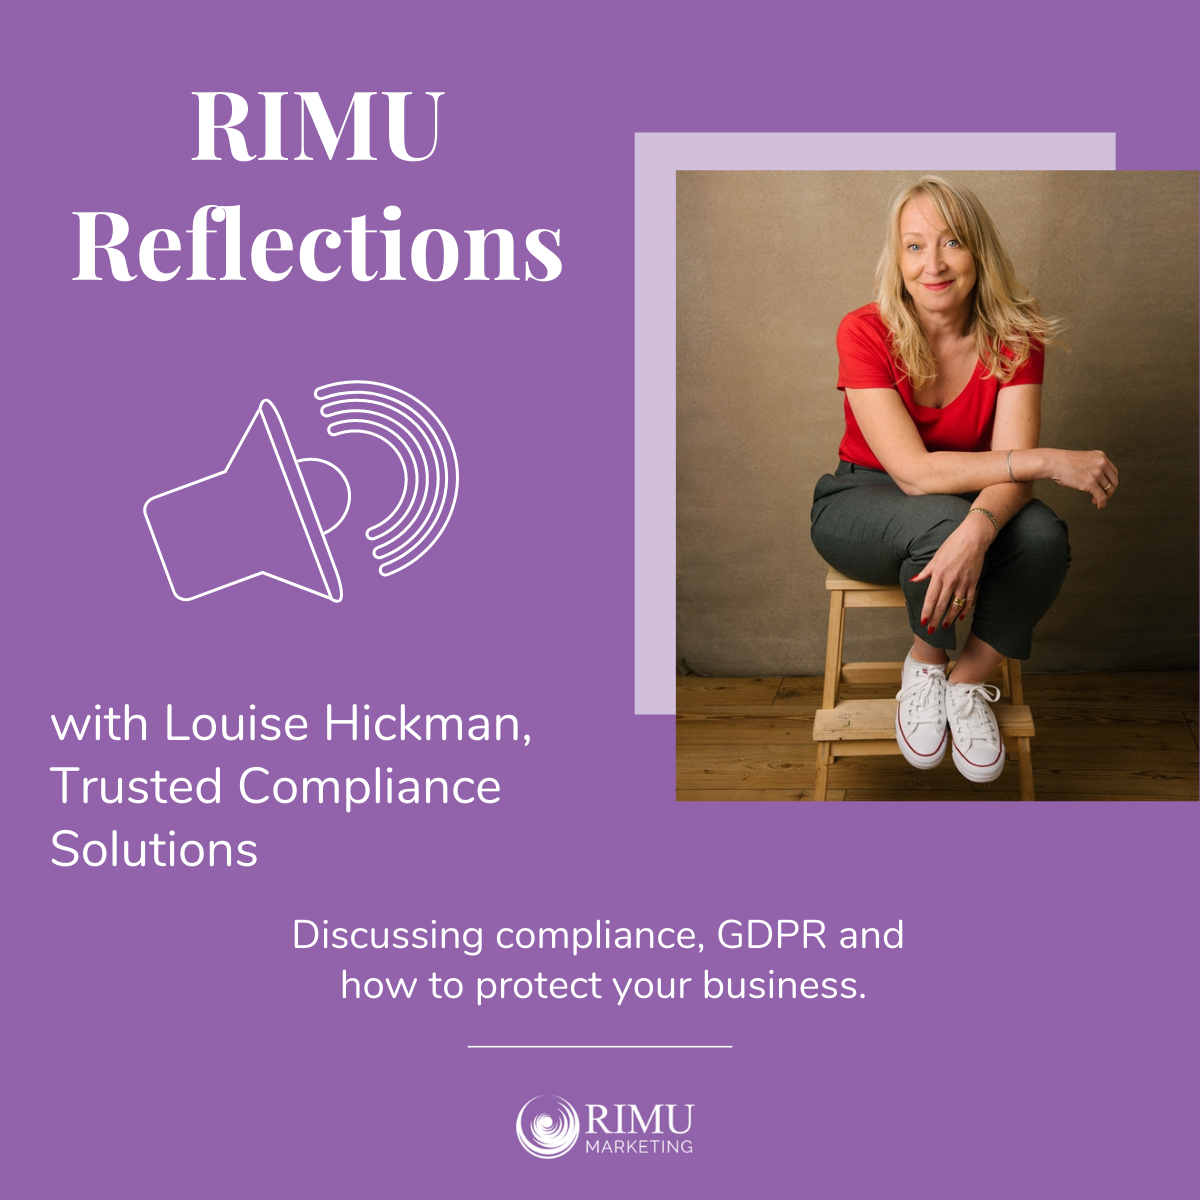 RIMU Reflections - Louise Hickman